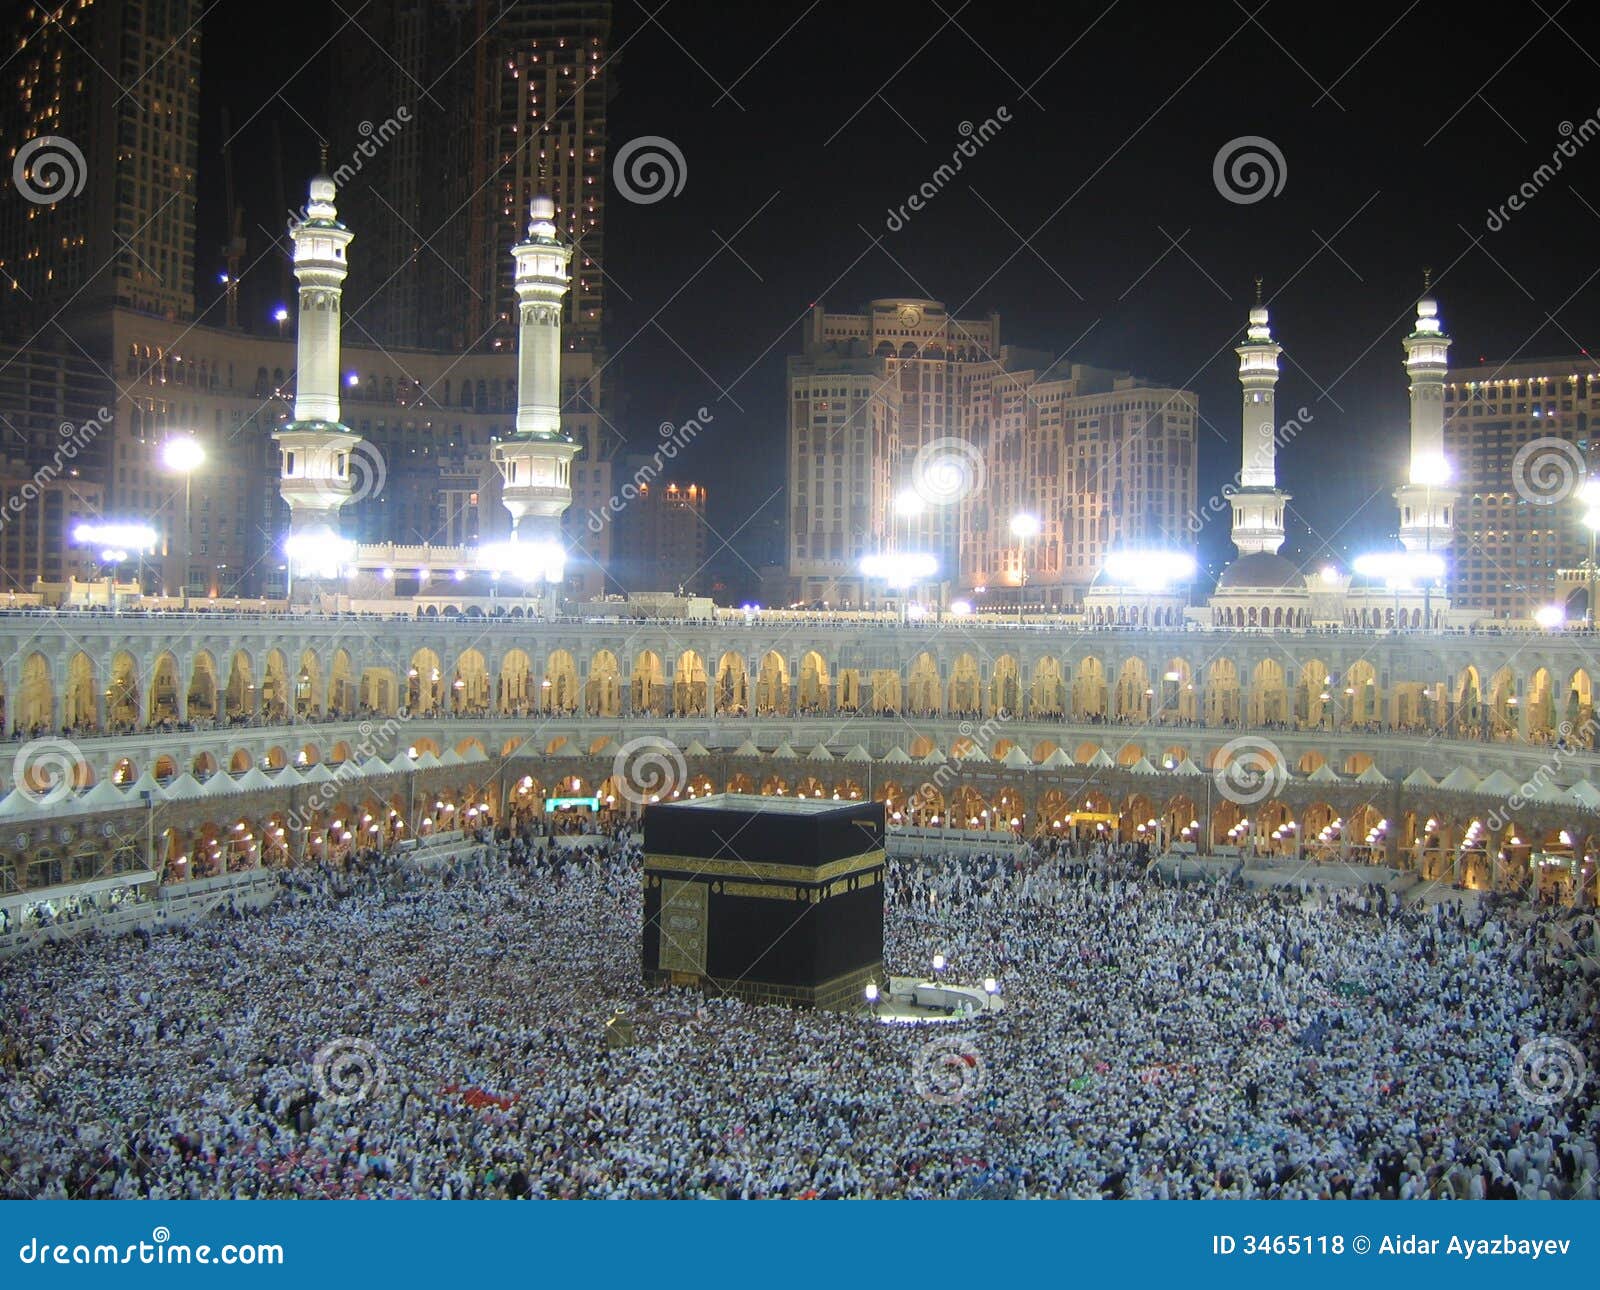 Kaaba Cartoons, Illustrations & Vector Stock Images - 730 